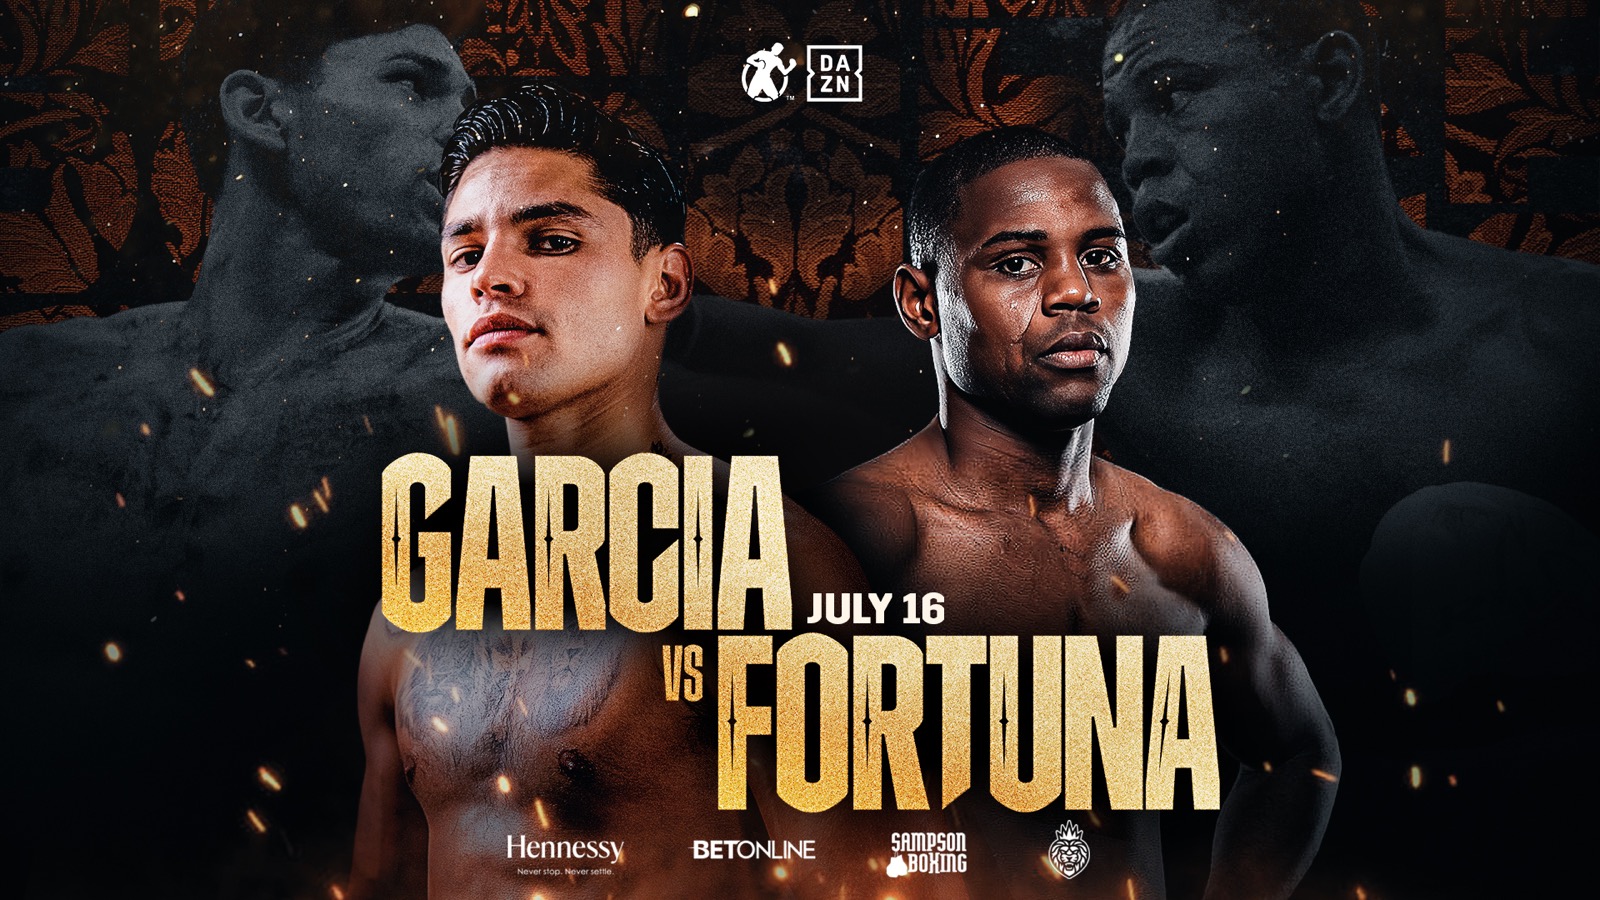 Ryan Garcia expects to be sharp for Javier Fortuna fight on July 16th